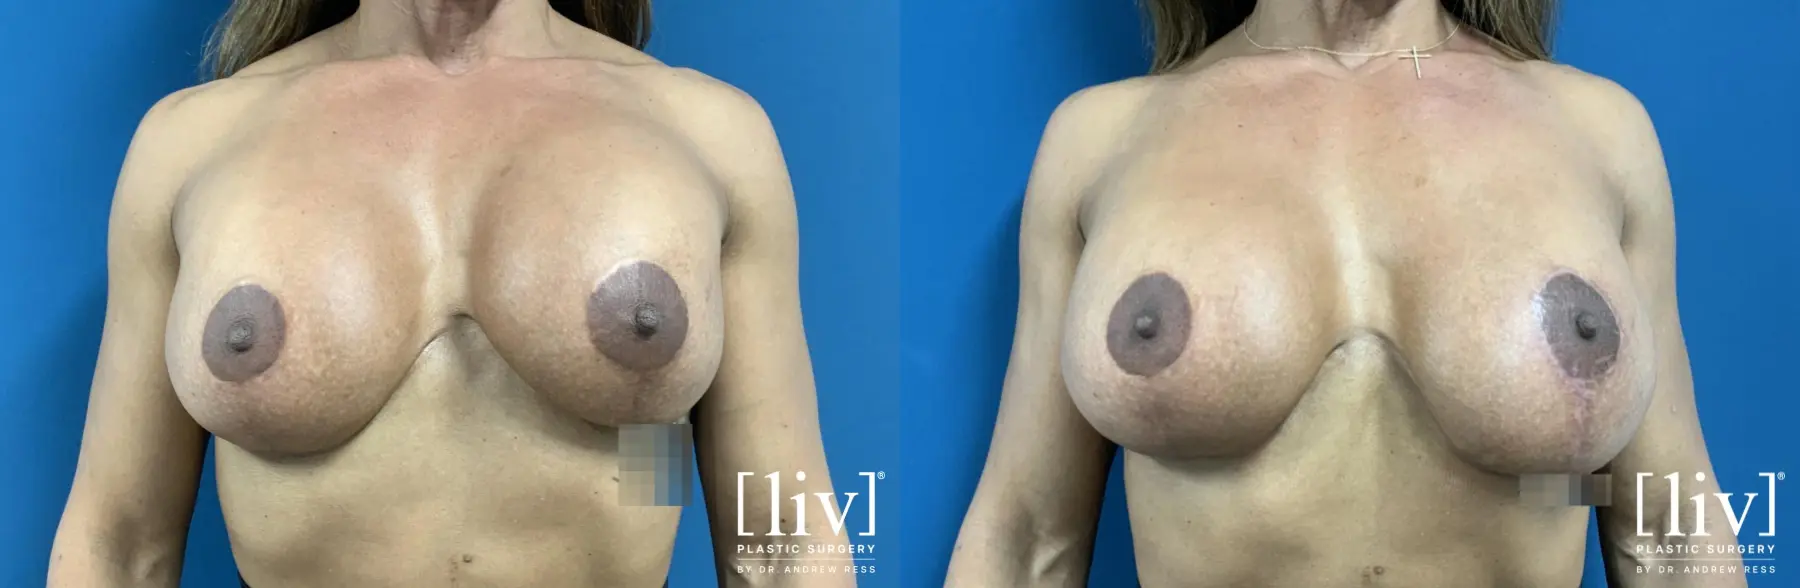 Breast Implant Exchange and Capsulectomy - Before and After  